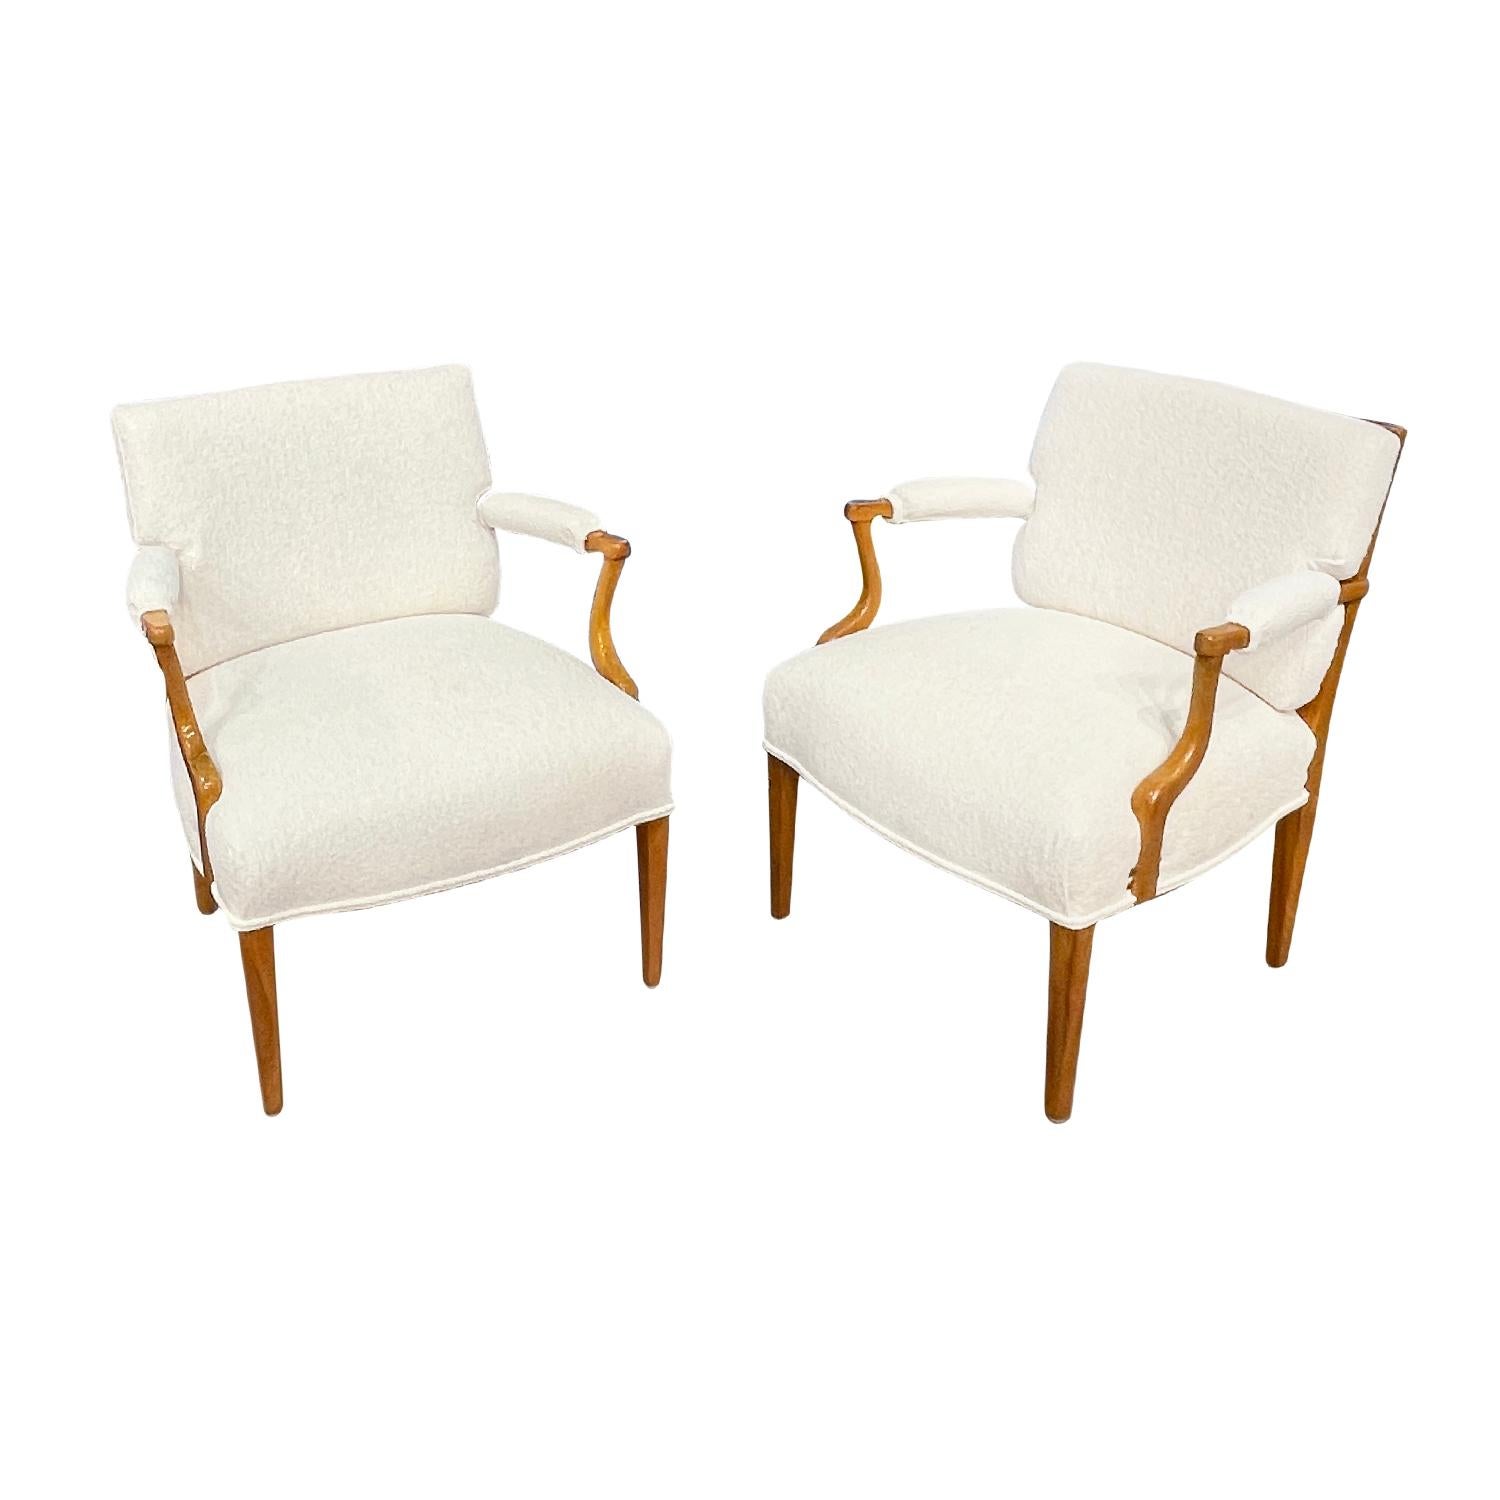 20th Century Swedish Vintage Svenskt Tenn Pair of Beech Armchairs by Josef Frank In Good Condition For Sale In West Palm Beach, FL